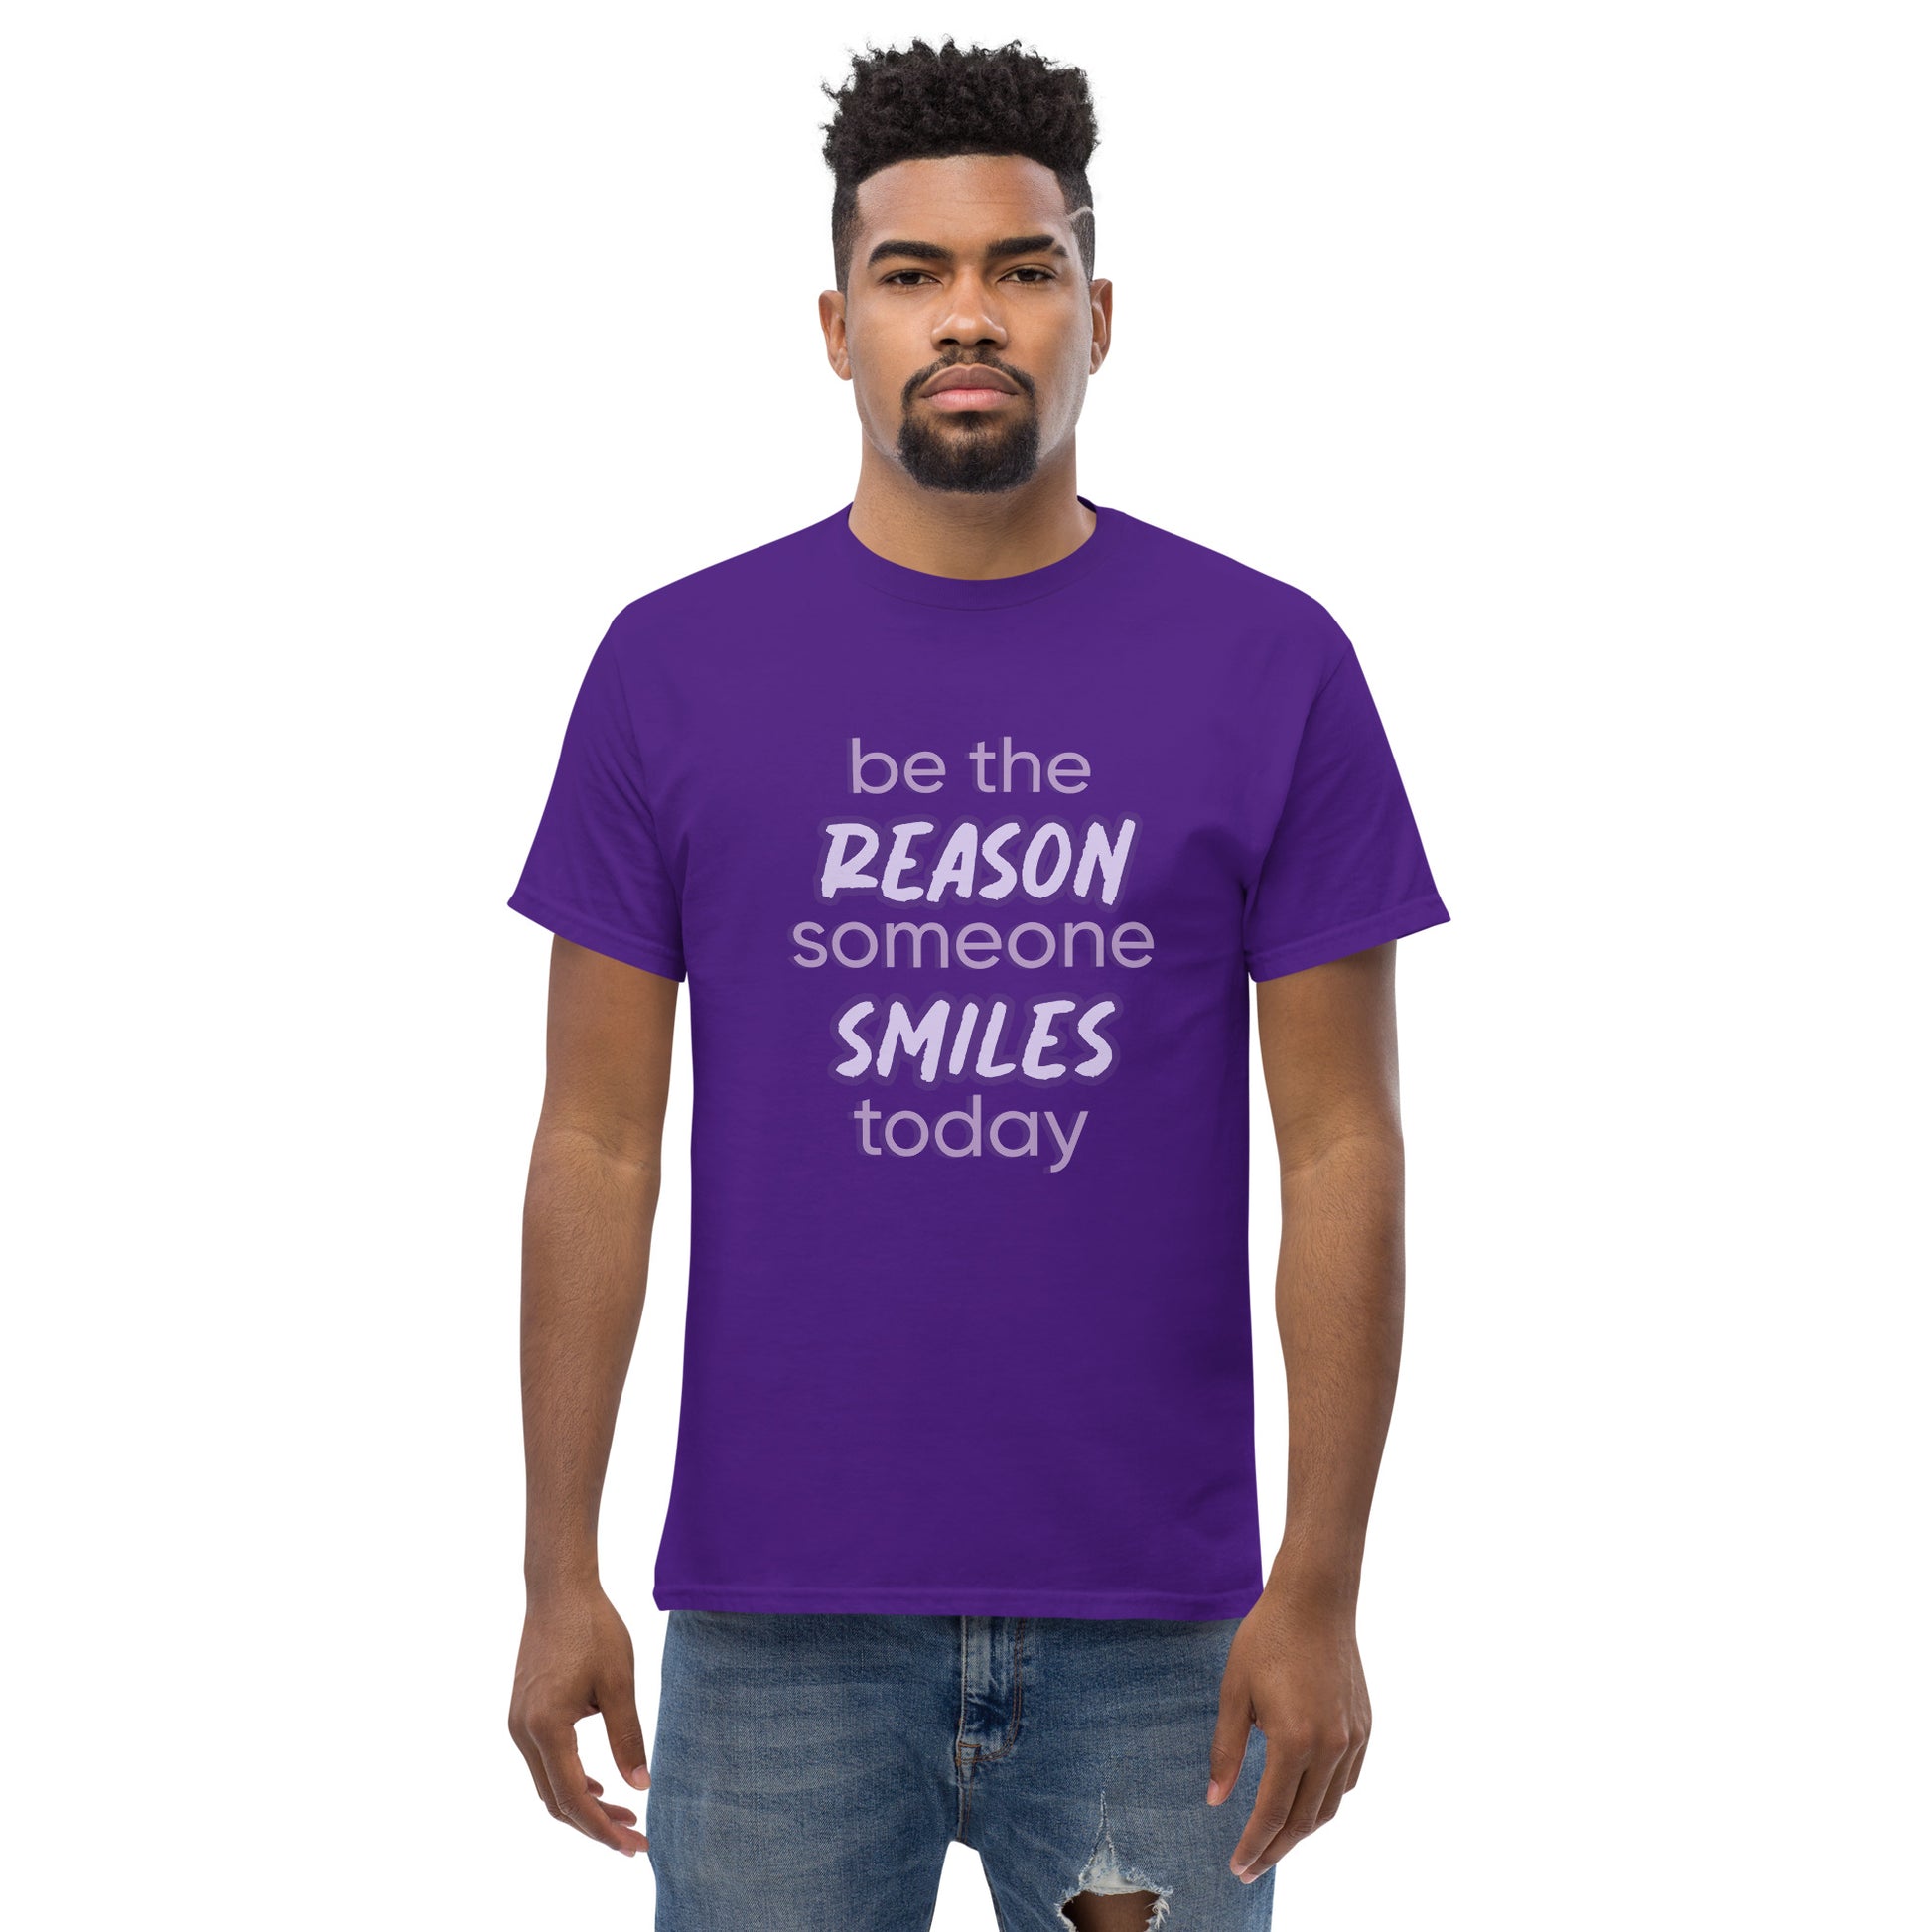 Men with purple T-shirt and the quote "be the reason someone smiles today" in purple on it. 